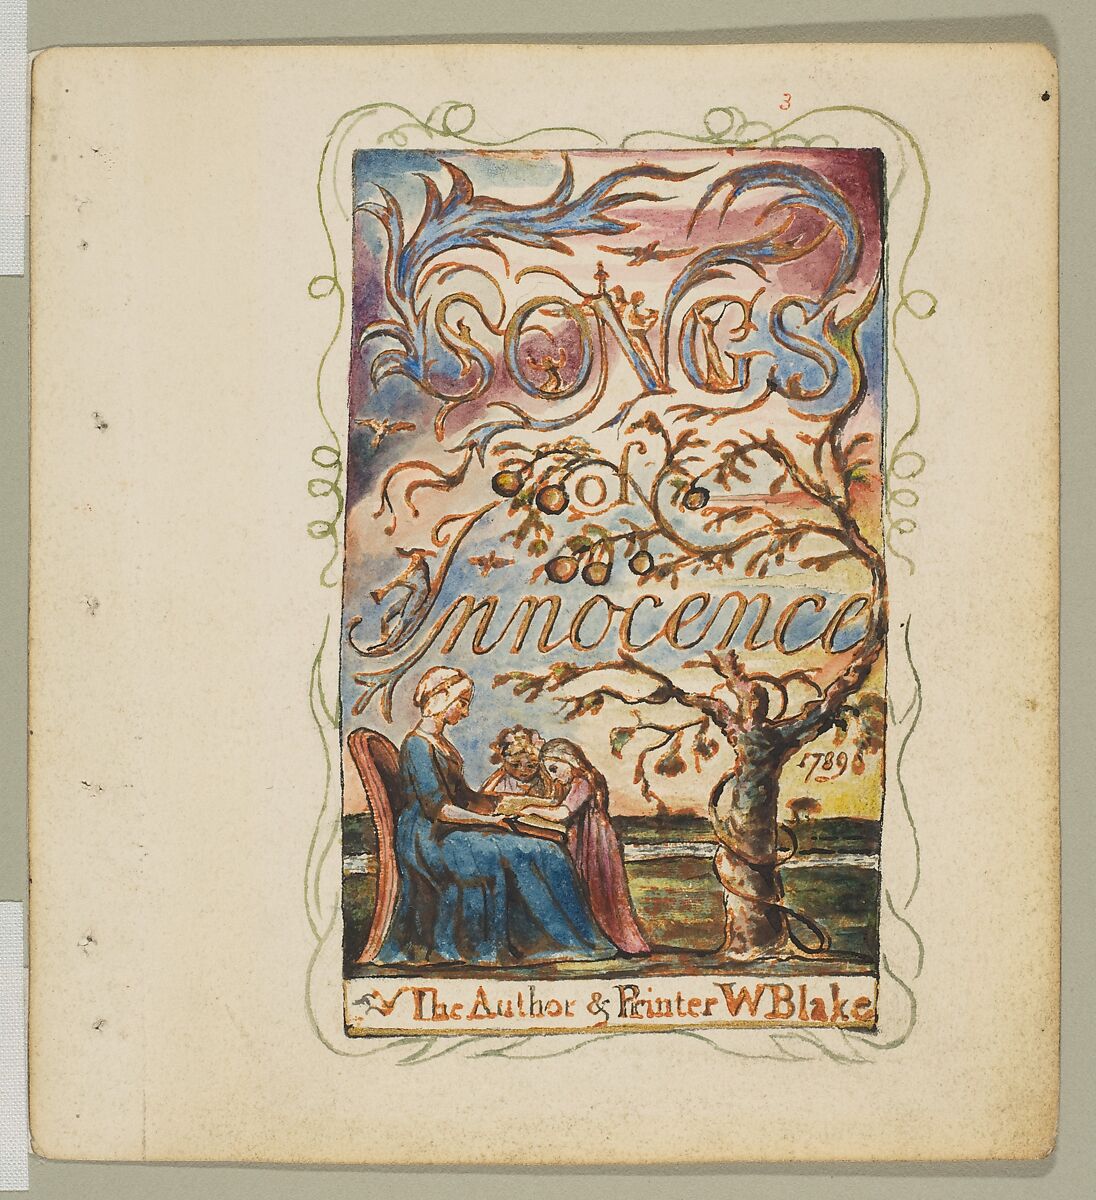 Songs of Innocence: Title Page, William Blake, Relief etching printed in orange-brown ink and hand-colored with watercolor and shell gold